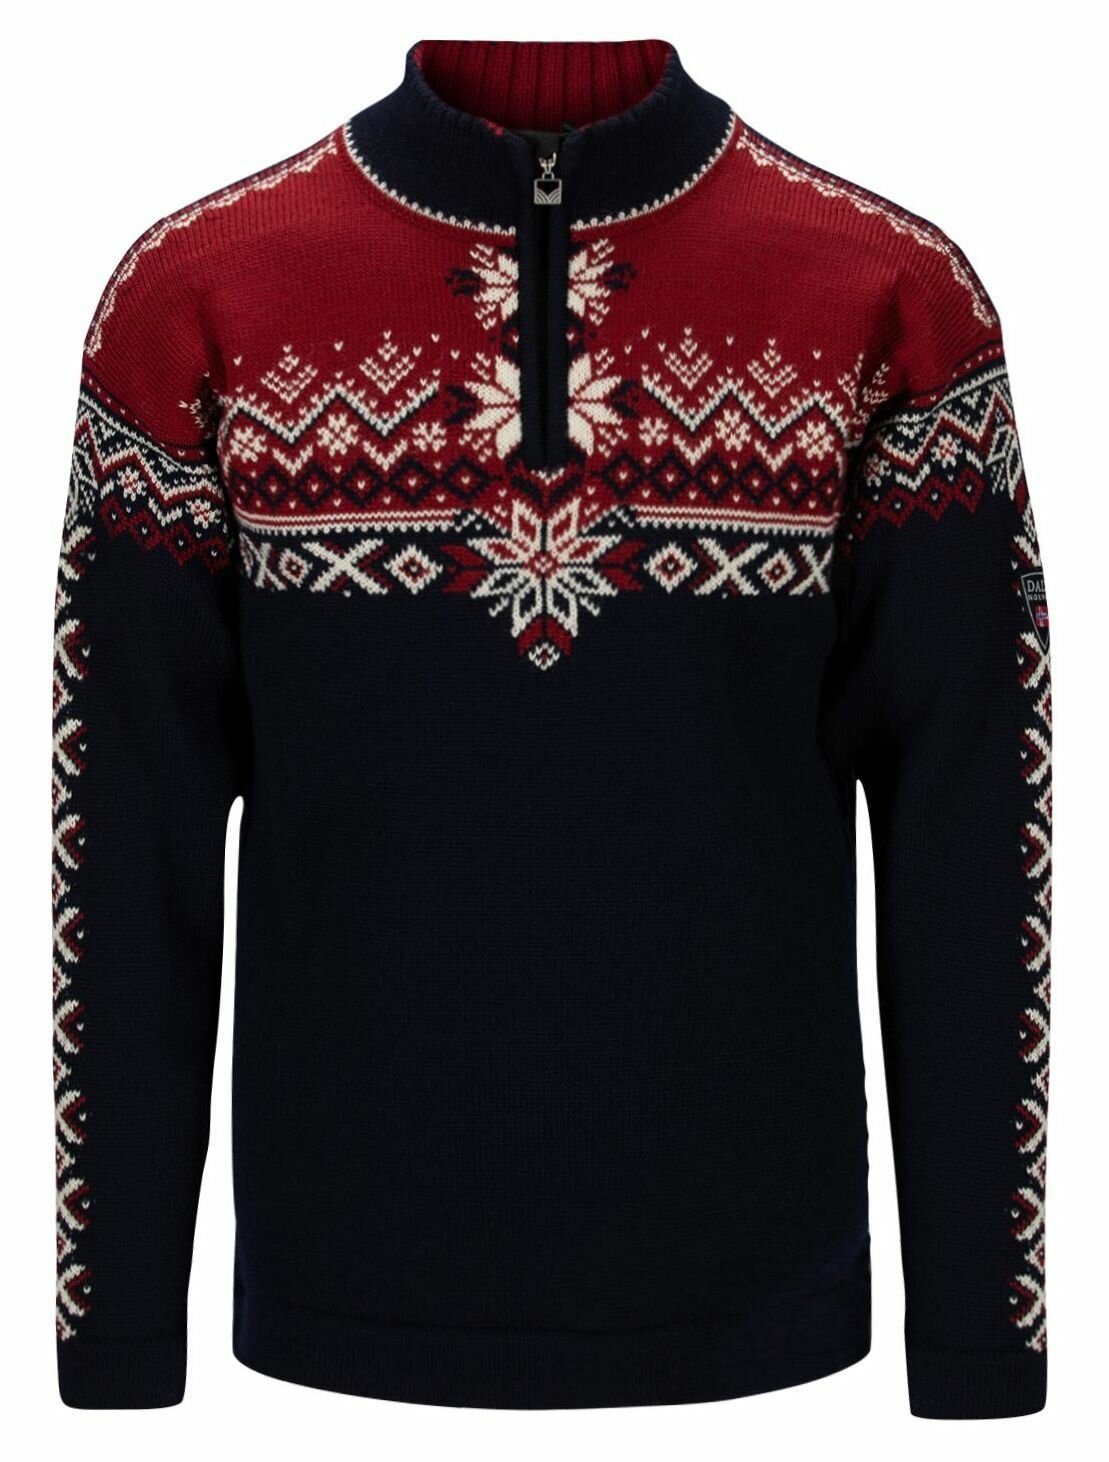 COLDSEASON.com, Mens 289,90 140 by of Anniversary Red/Navy Dale - Sweater € Norway